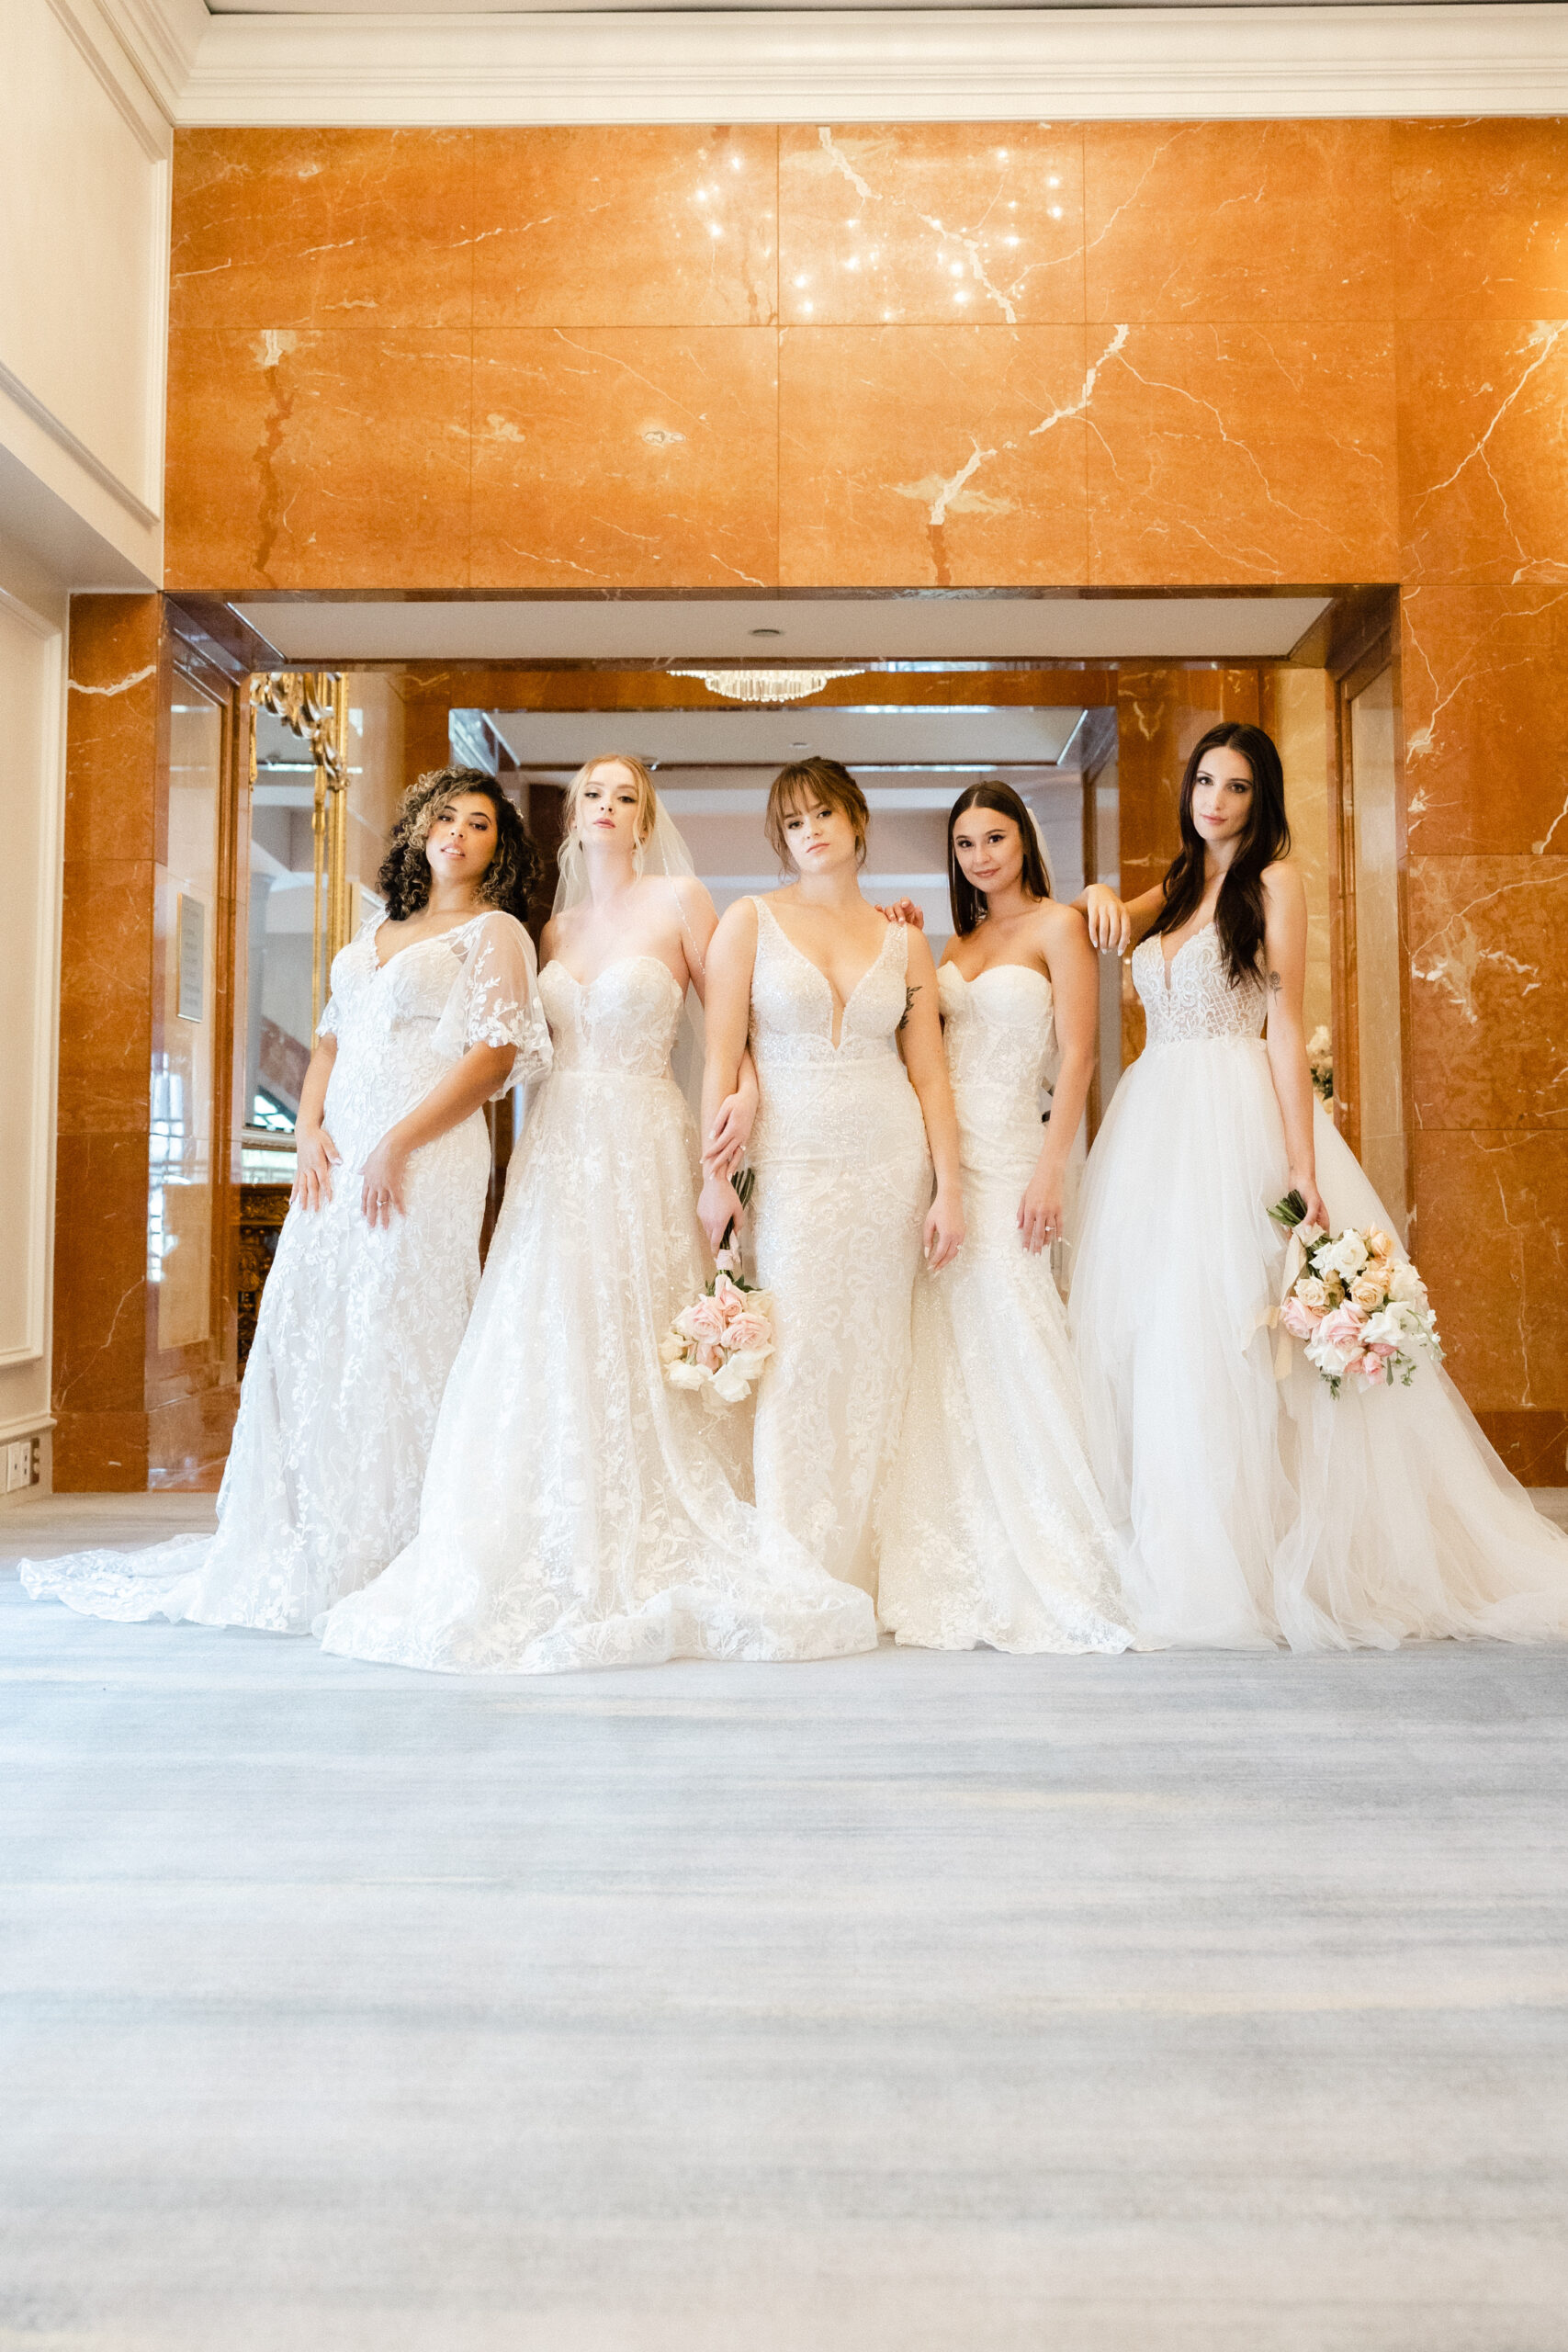 Brides in Our Couture Gowns